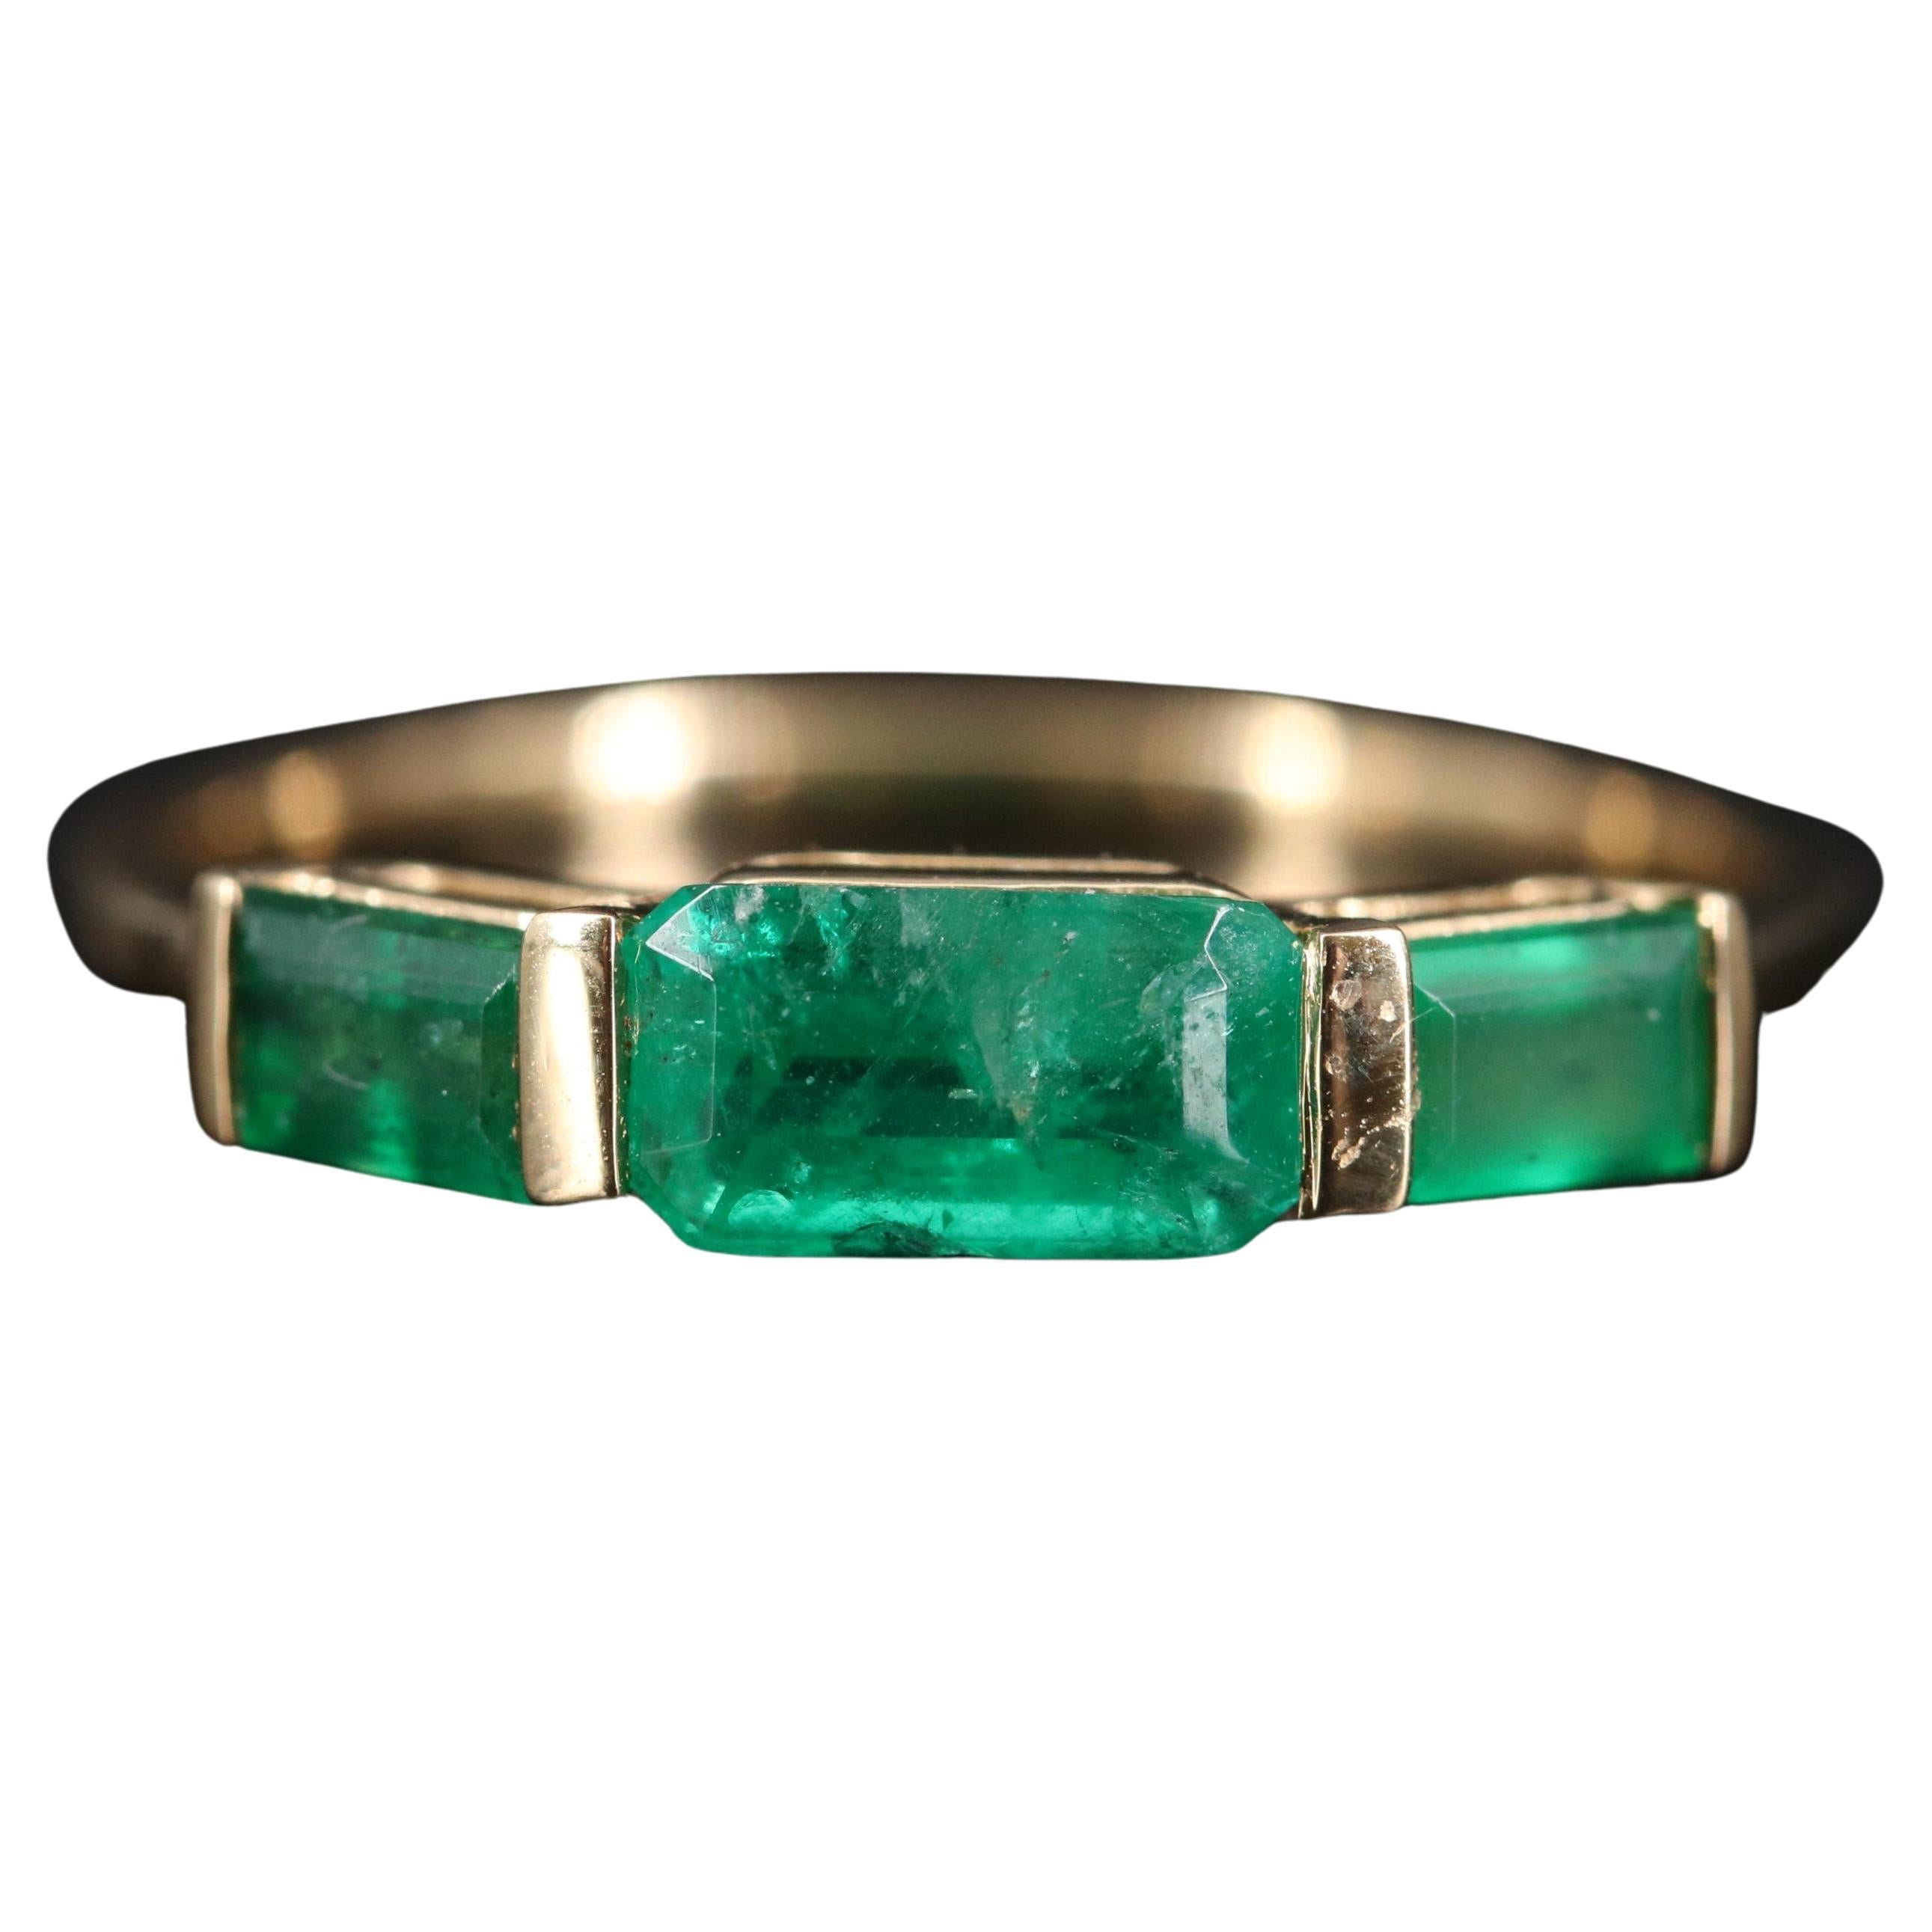 For Sale:  18K Gold 3 CT Natural Emerald Art Deco Style Engagement Ring, Fashion Band Rings